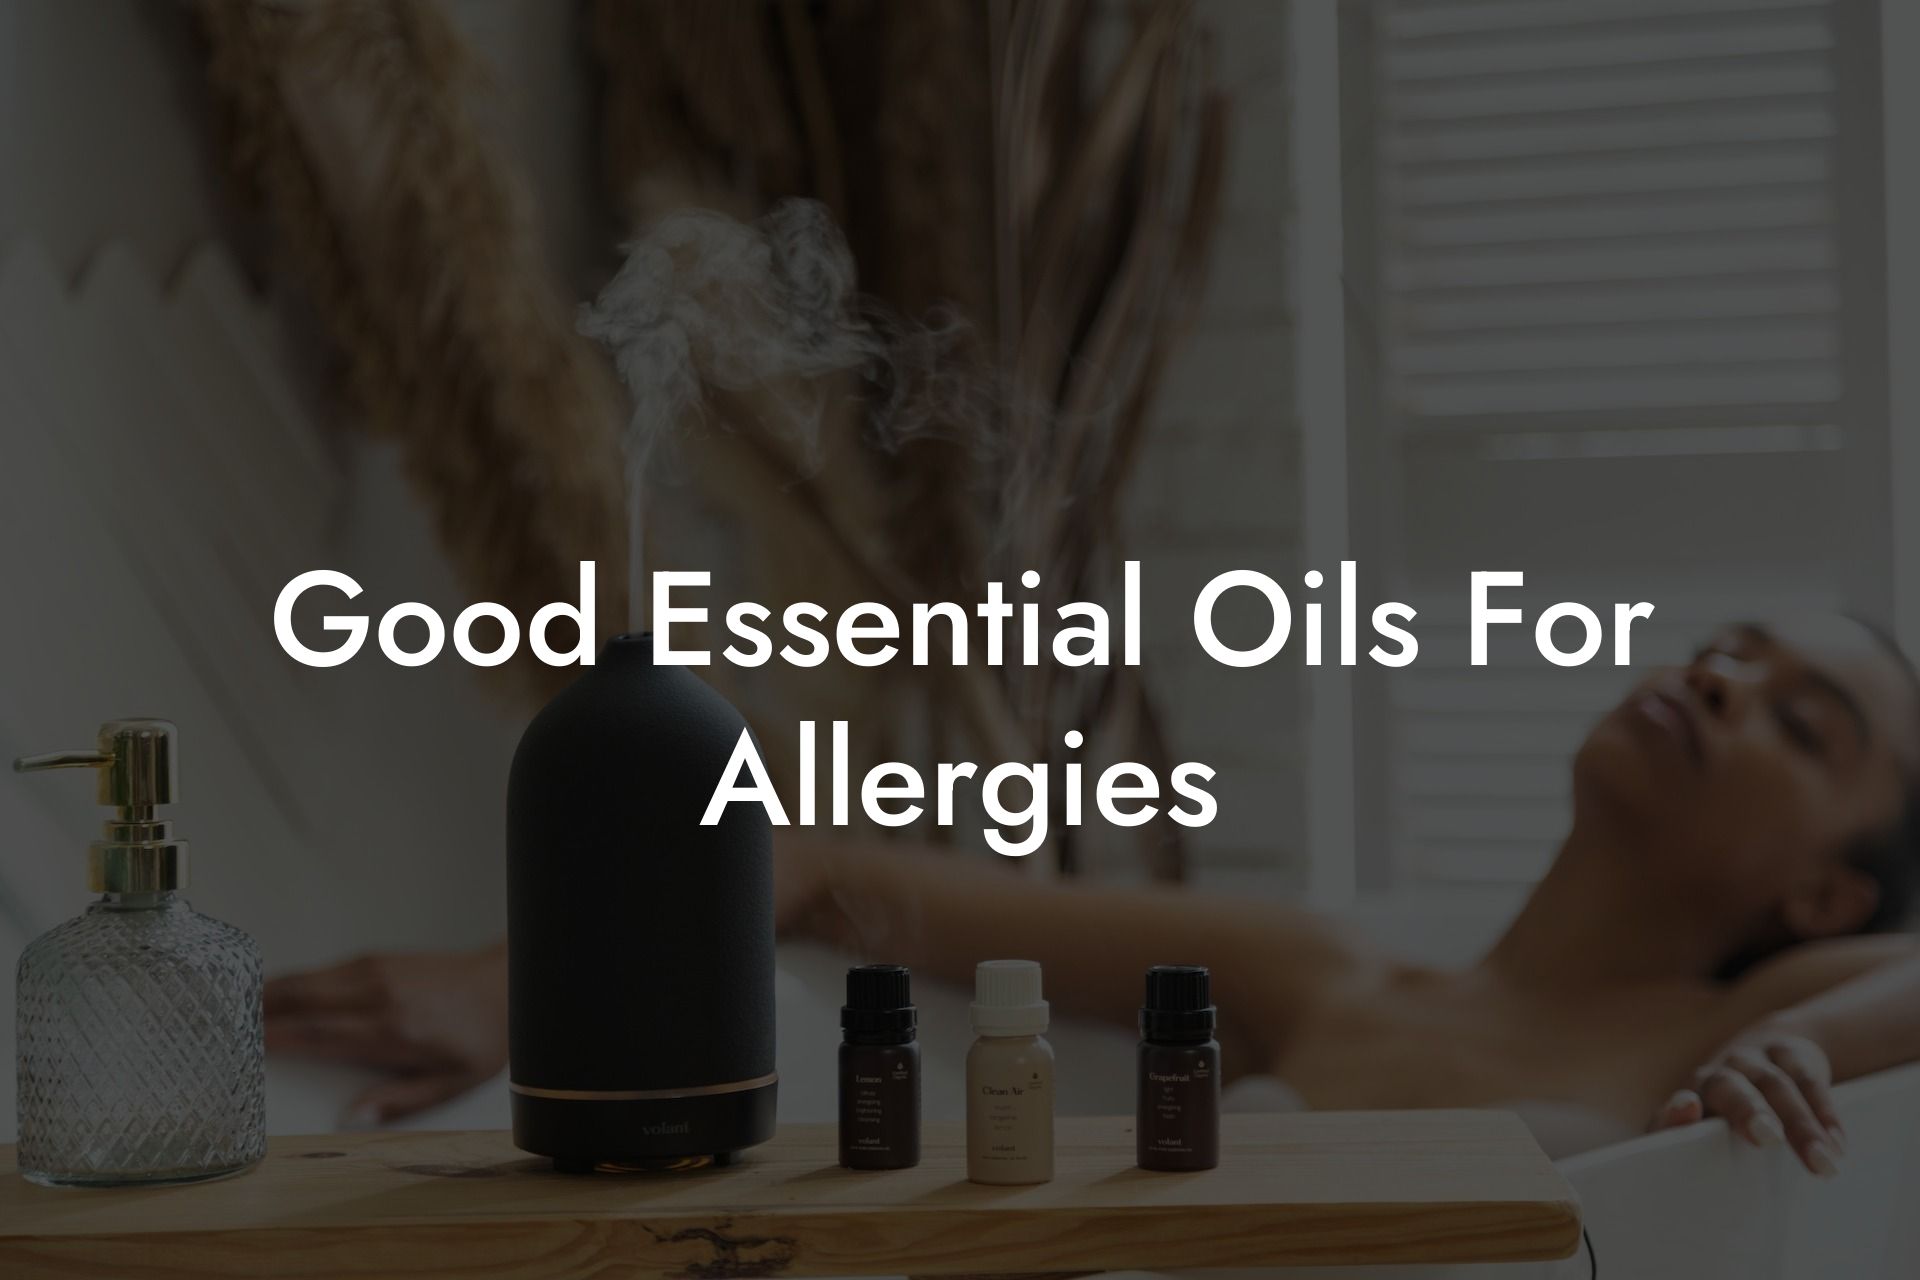 Good Essential Oils For Allergies